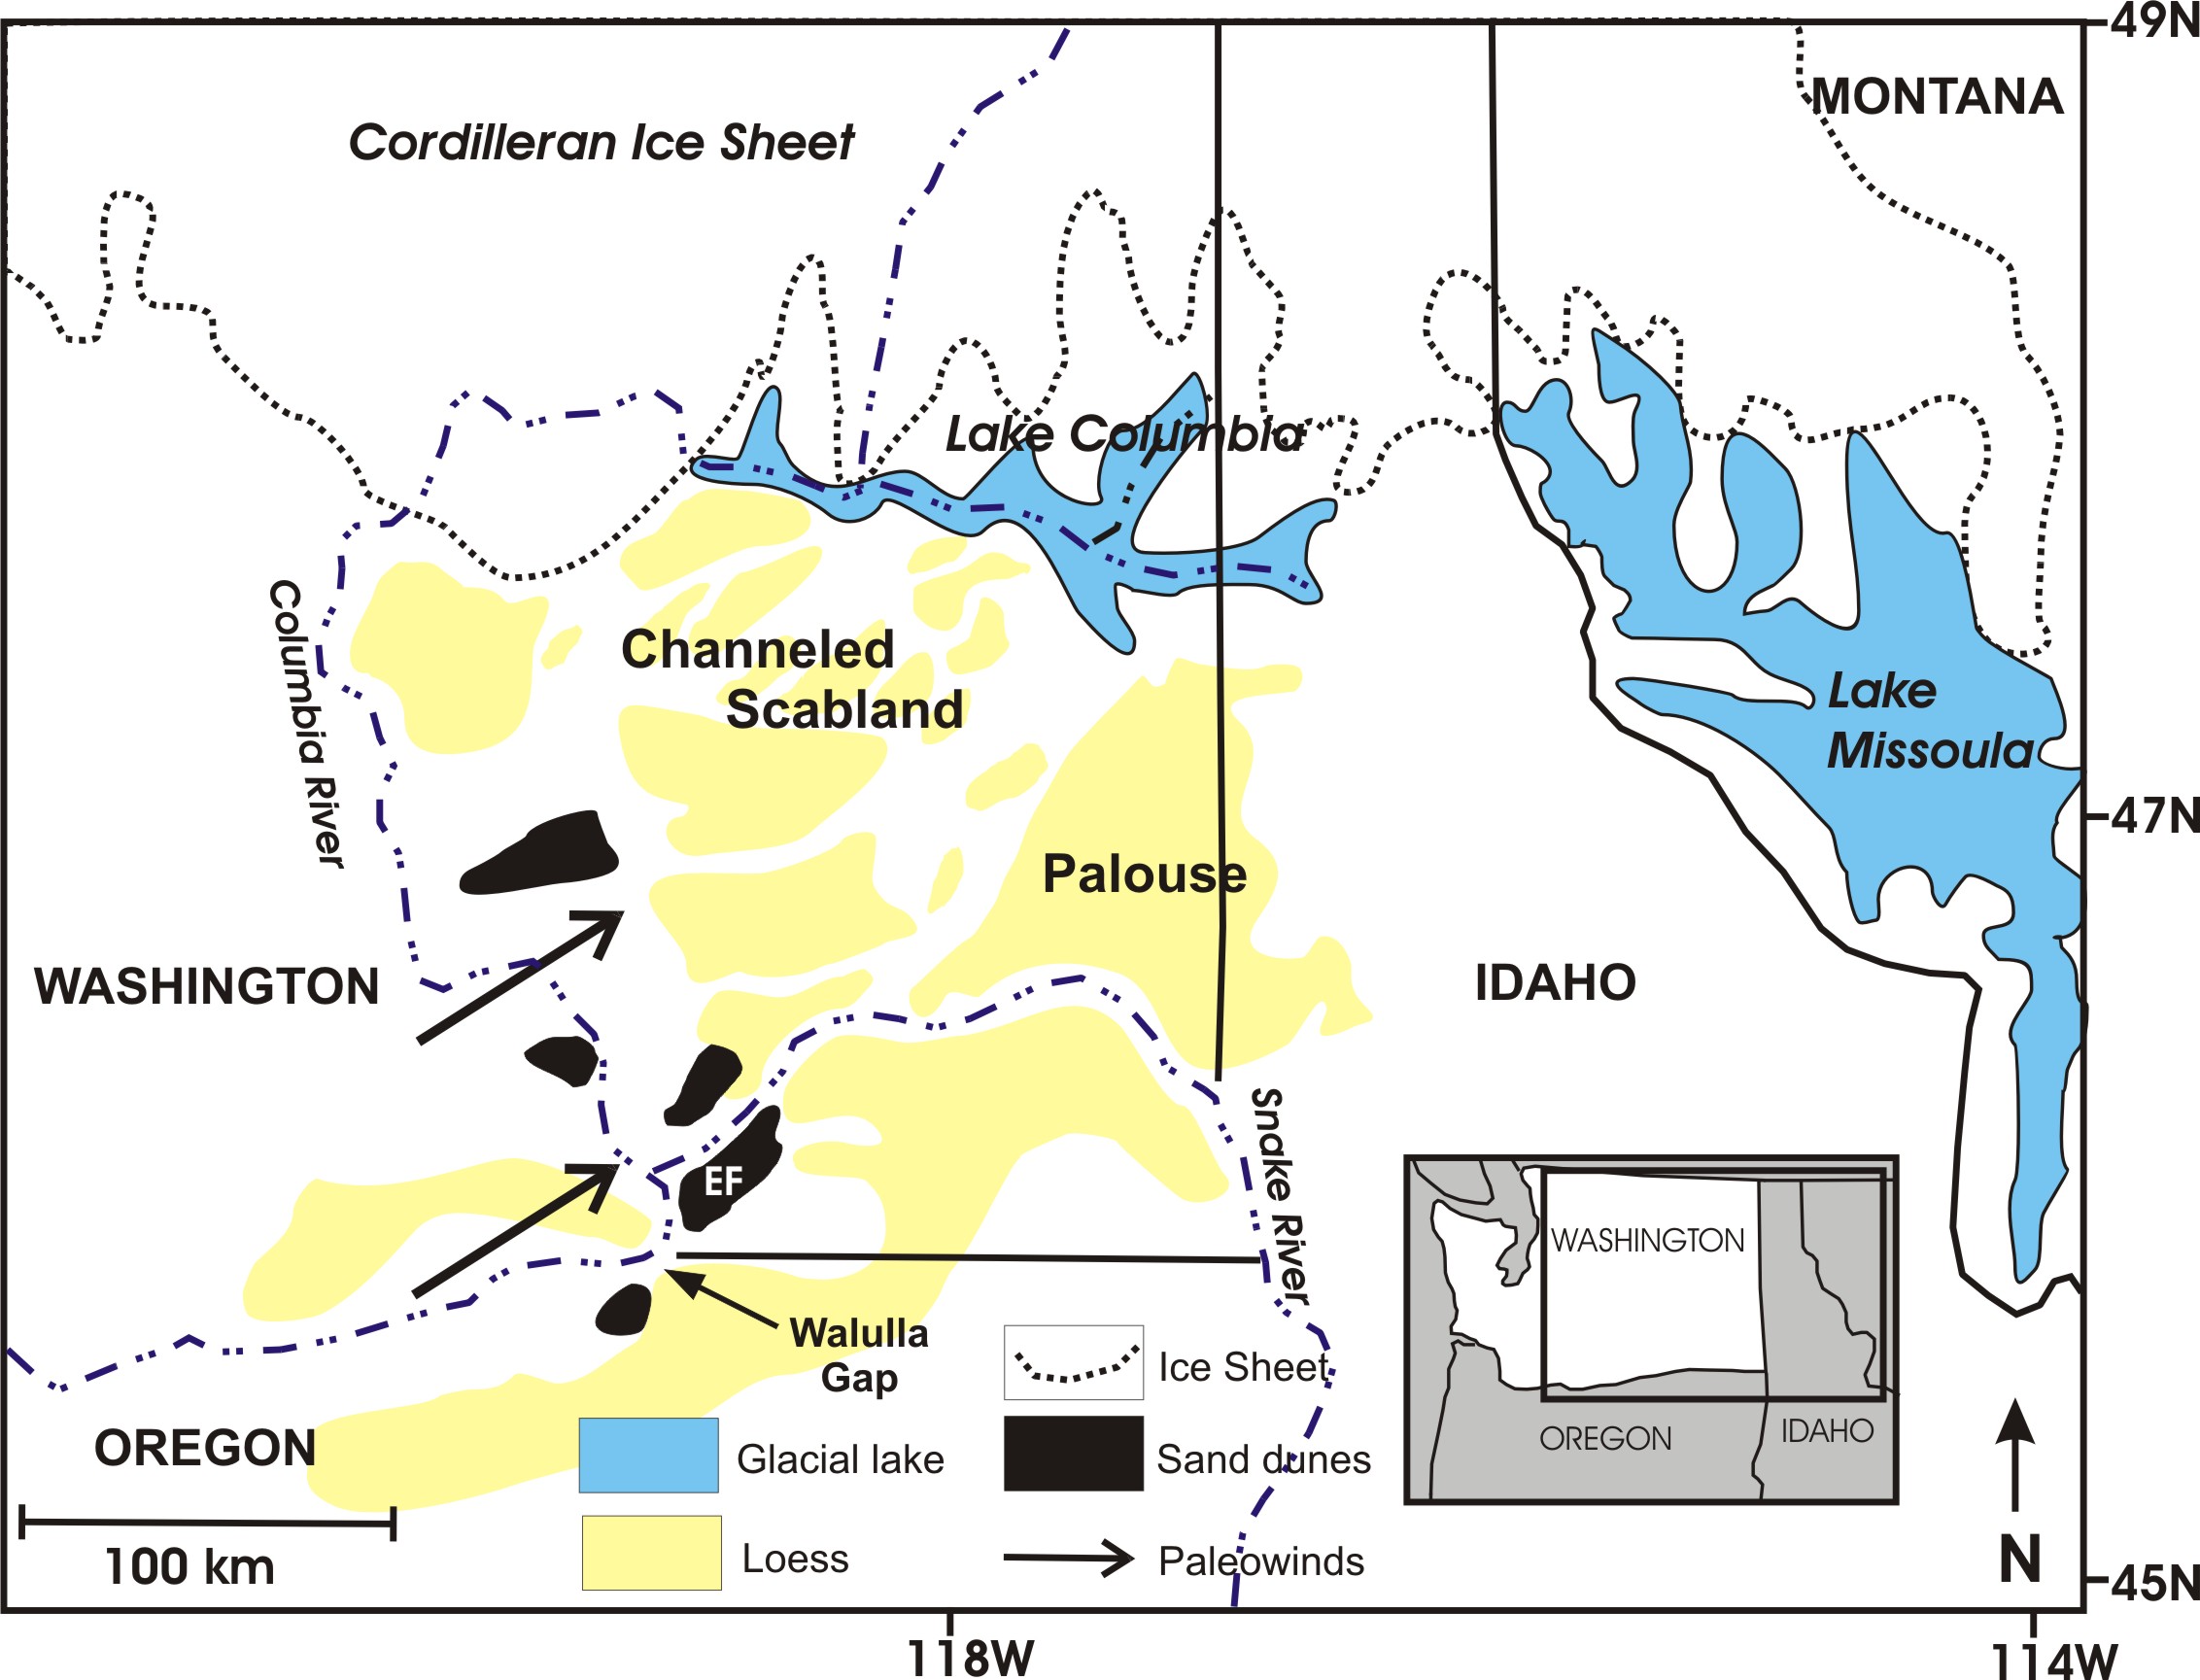 Map of eastern Washington, northeastern Oregon, northern Idaho, and western Montana showing the extent of Pleistocene lake Missoula and Lake Columbia at the southern end of an ice sheet. South of the glacier is the Channeled Scabland and Palouse, an area marked by thick loess deposits separated by channels cut by floodwaters.